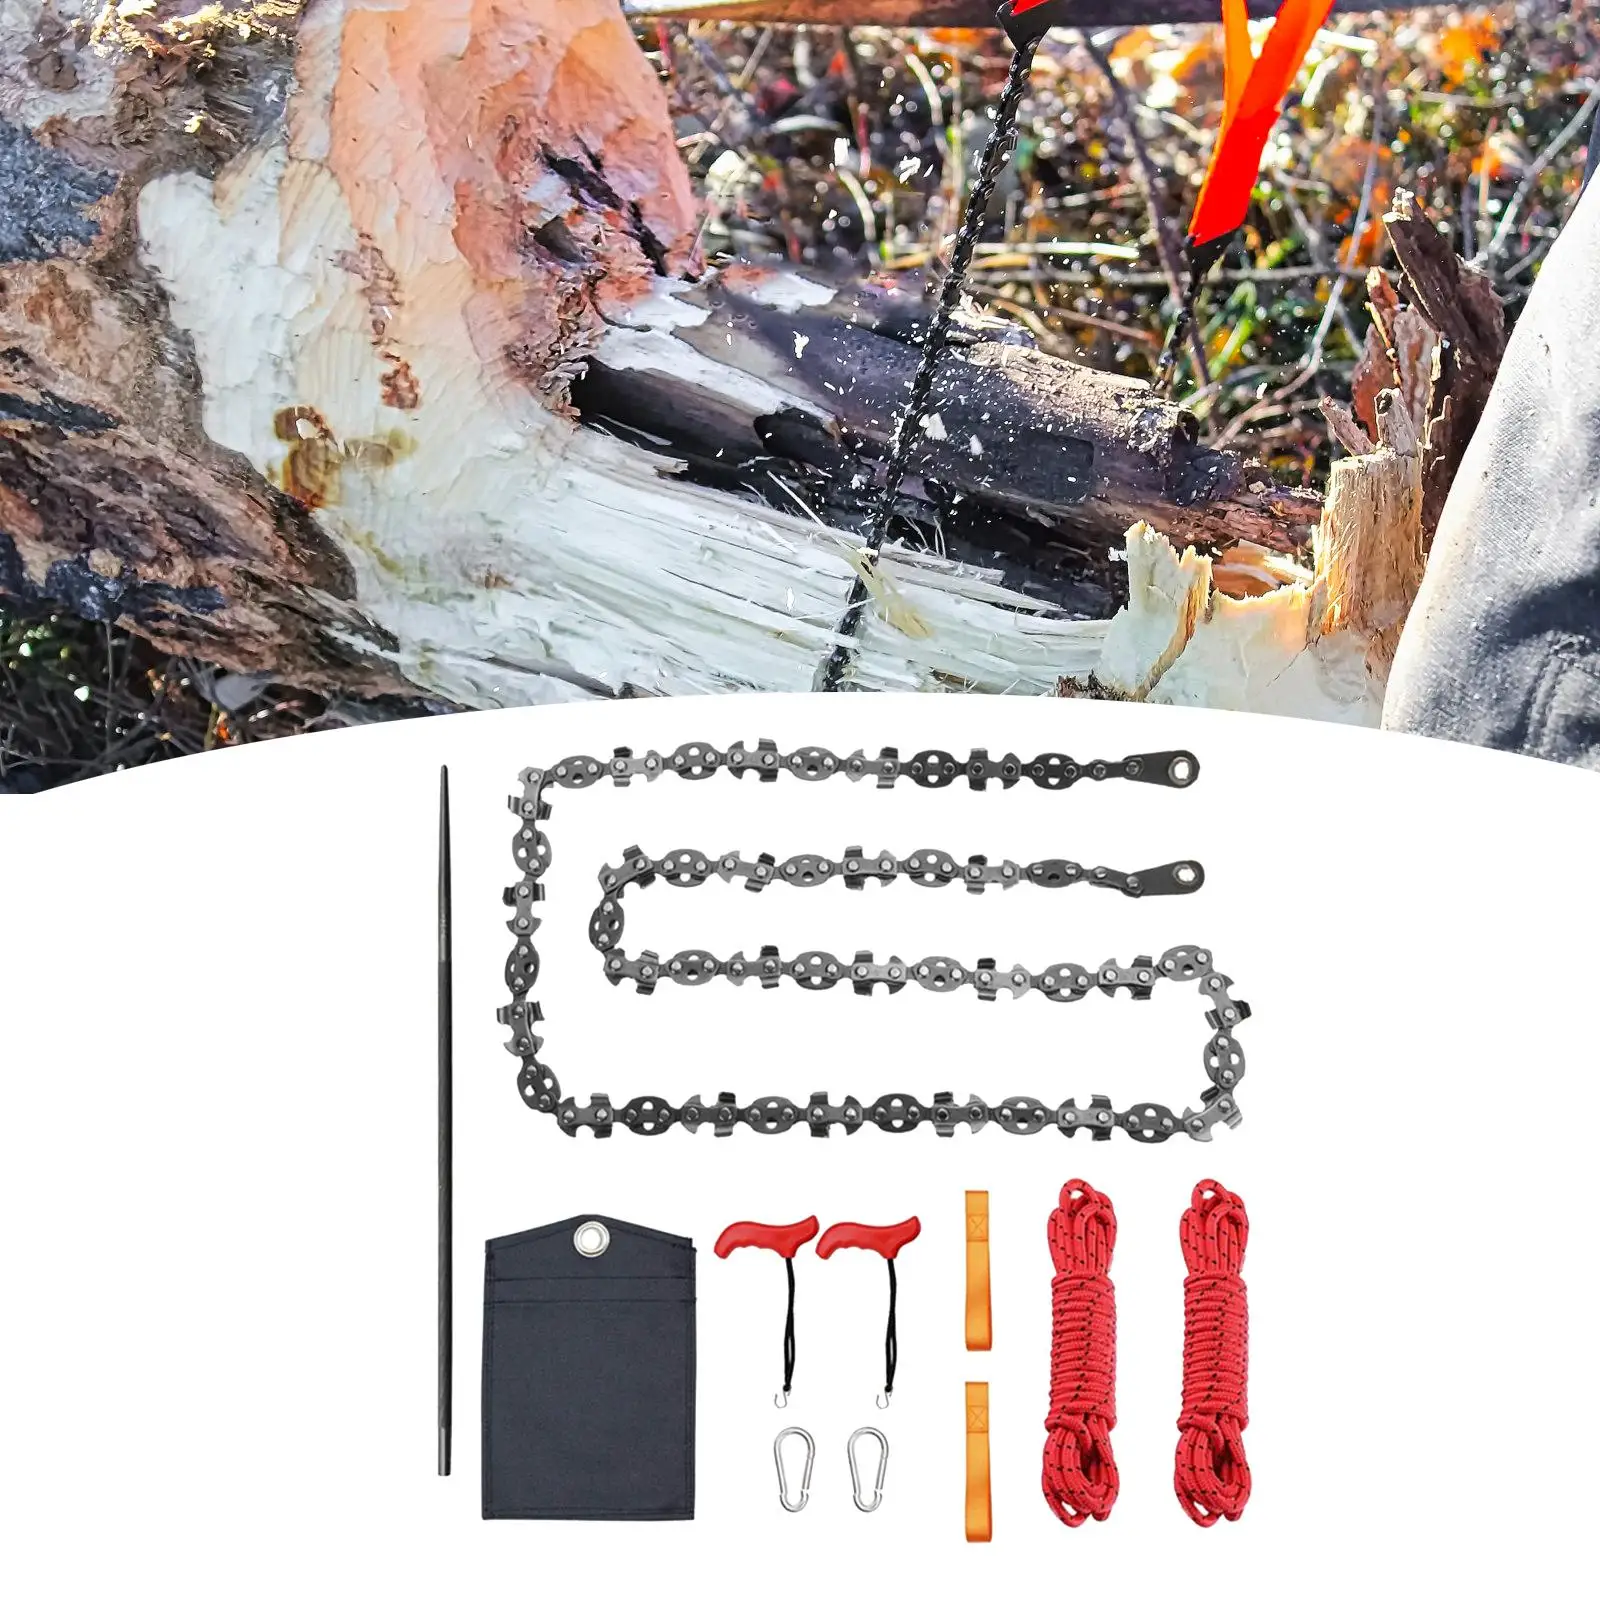 Pocket Saw Double Sides Blade Camping Saw Hand Rope Chain Saw Emergency Saw for Gardening Hiking Camping Emergency Outdoor